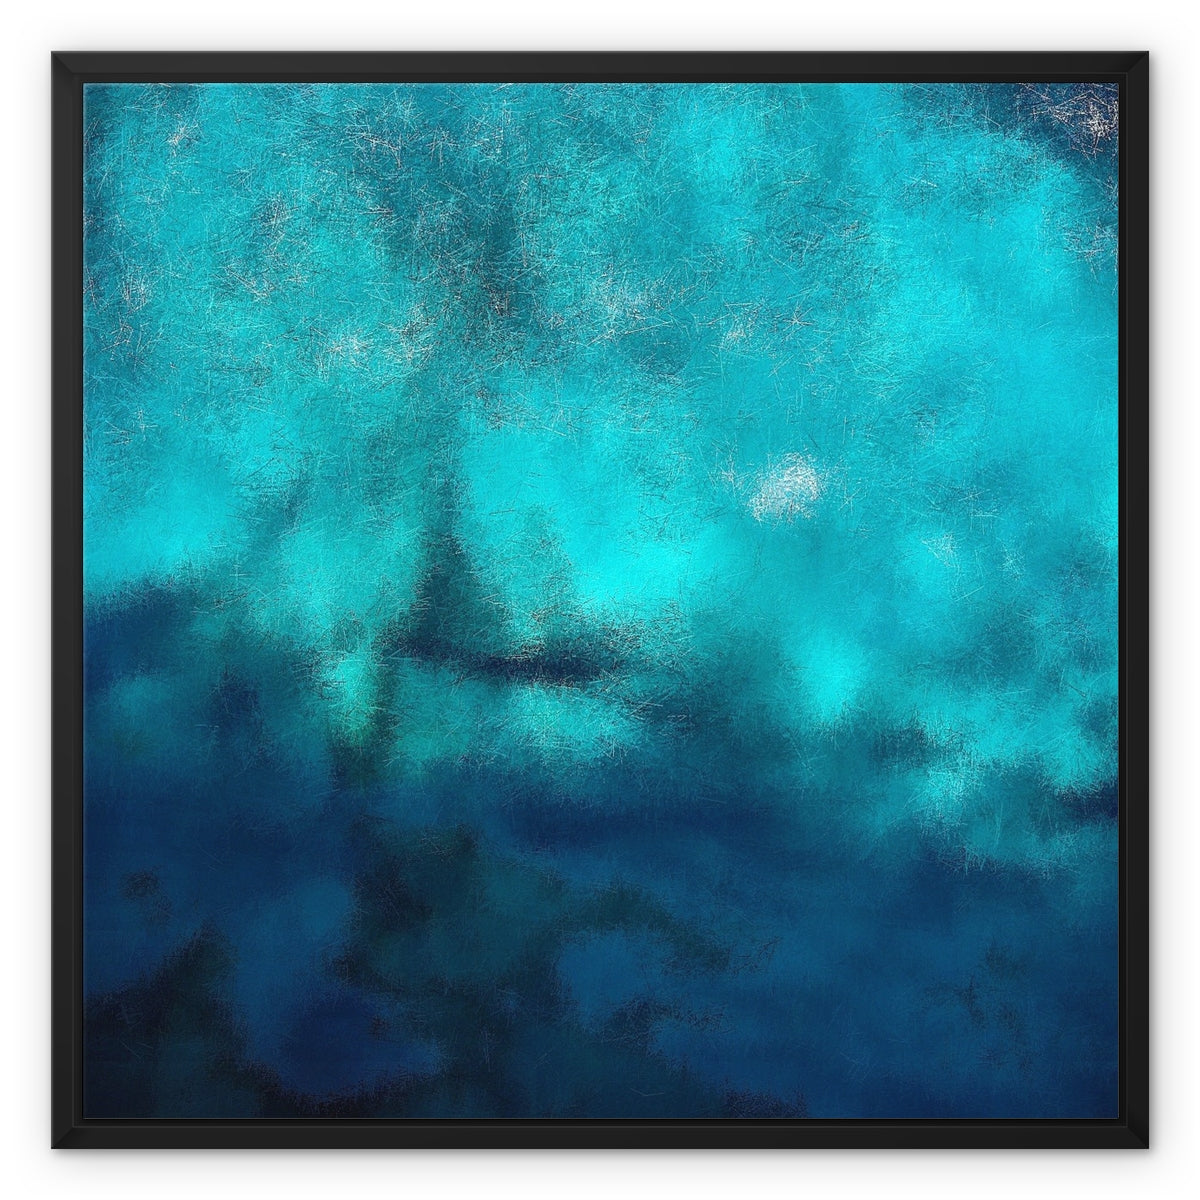 Diving Off Kos Greece Painting | Framed Canvas From Scotland-Floating Framed Canvas Prints-World Art Gallery-24"x24"-Paintings, Prints, Homeware, Art Gifts From Scotland By Scottish Artist Kevin Hunter